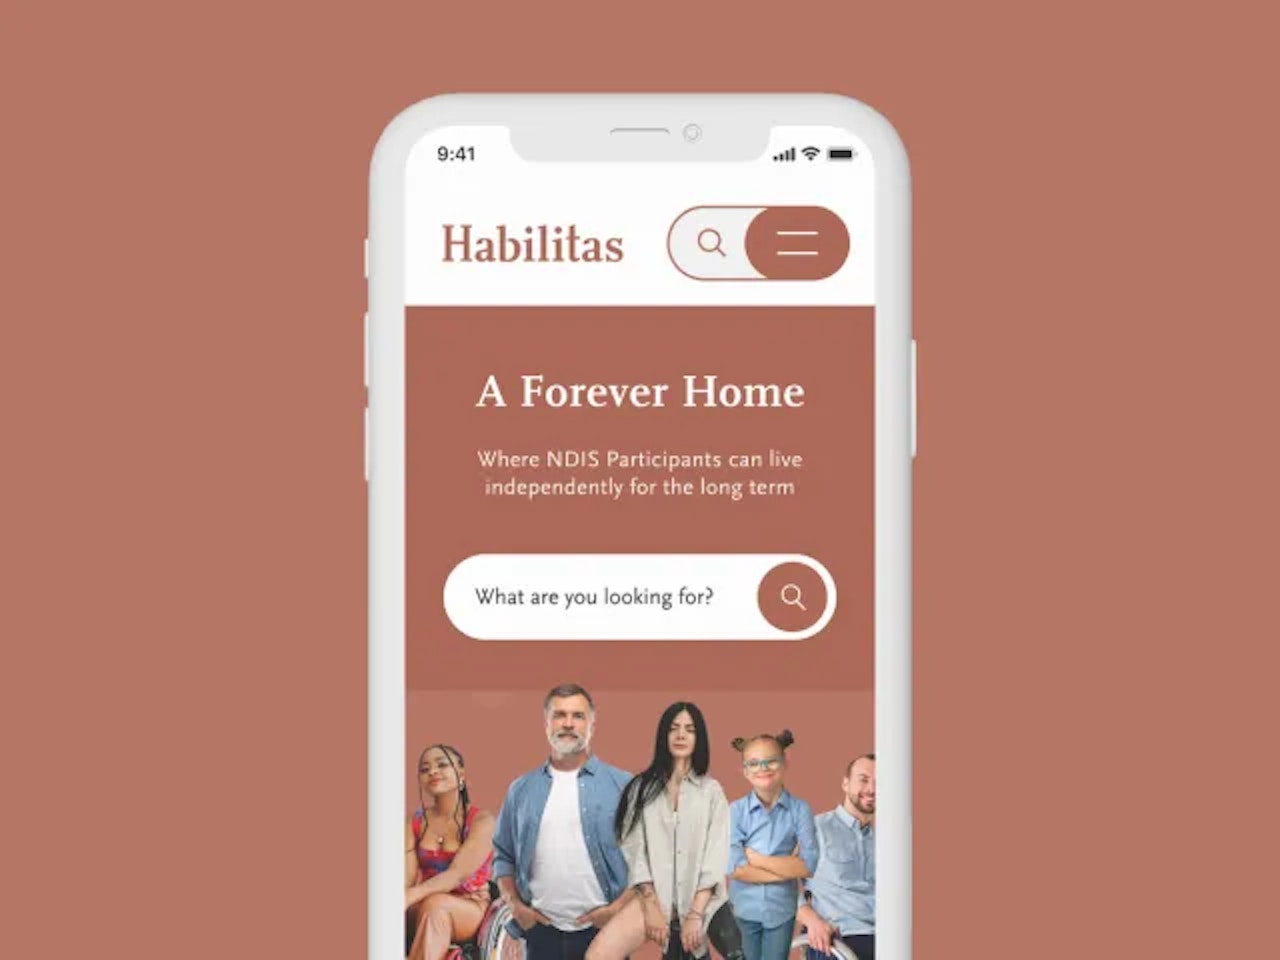 A mockup of the Habilitas website on mobile.